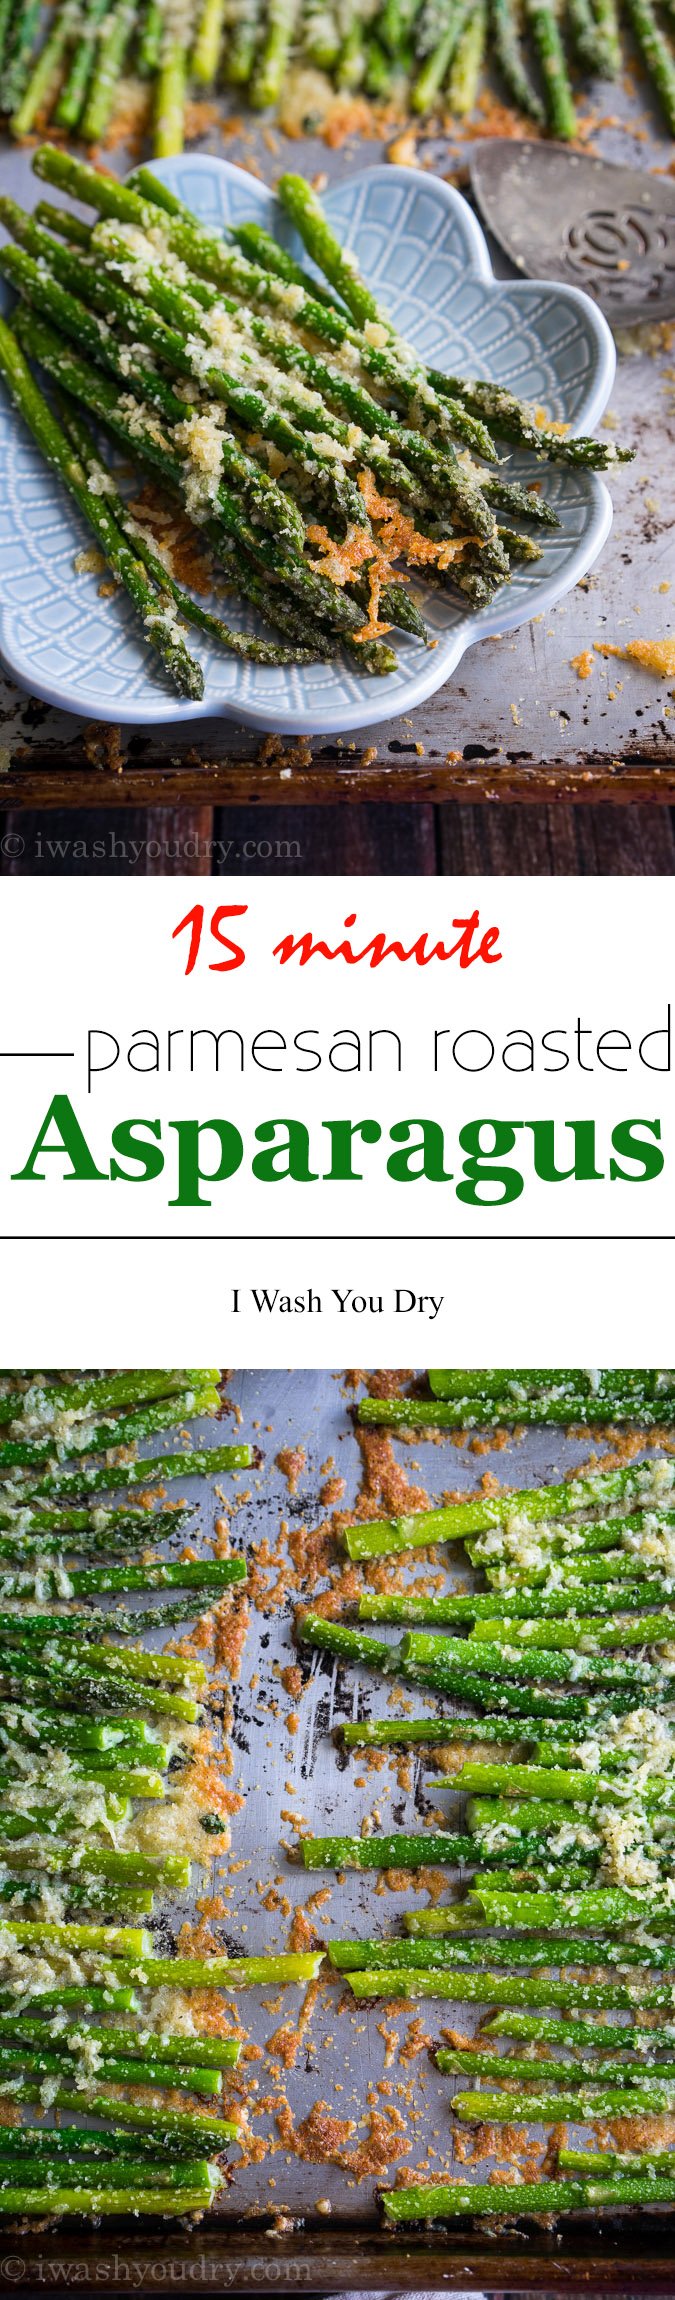 Love this quick and easy Parmesan Roasted Asparagus! It's ready in just 15 minutes, and my family loves it!